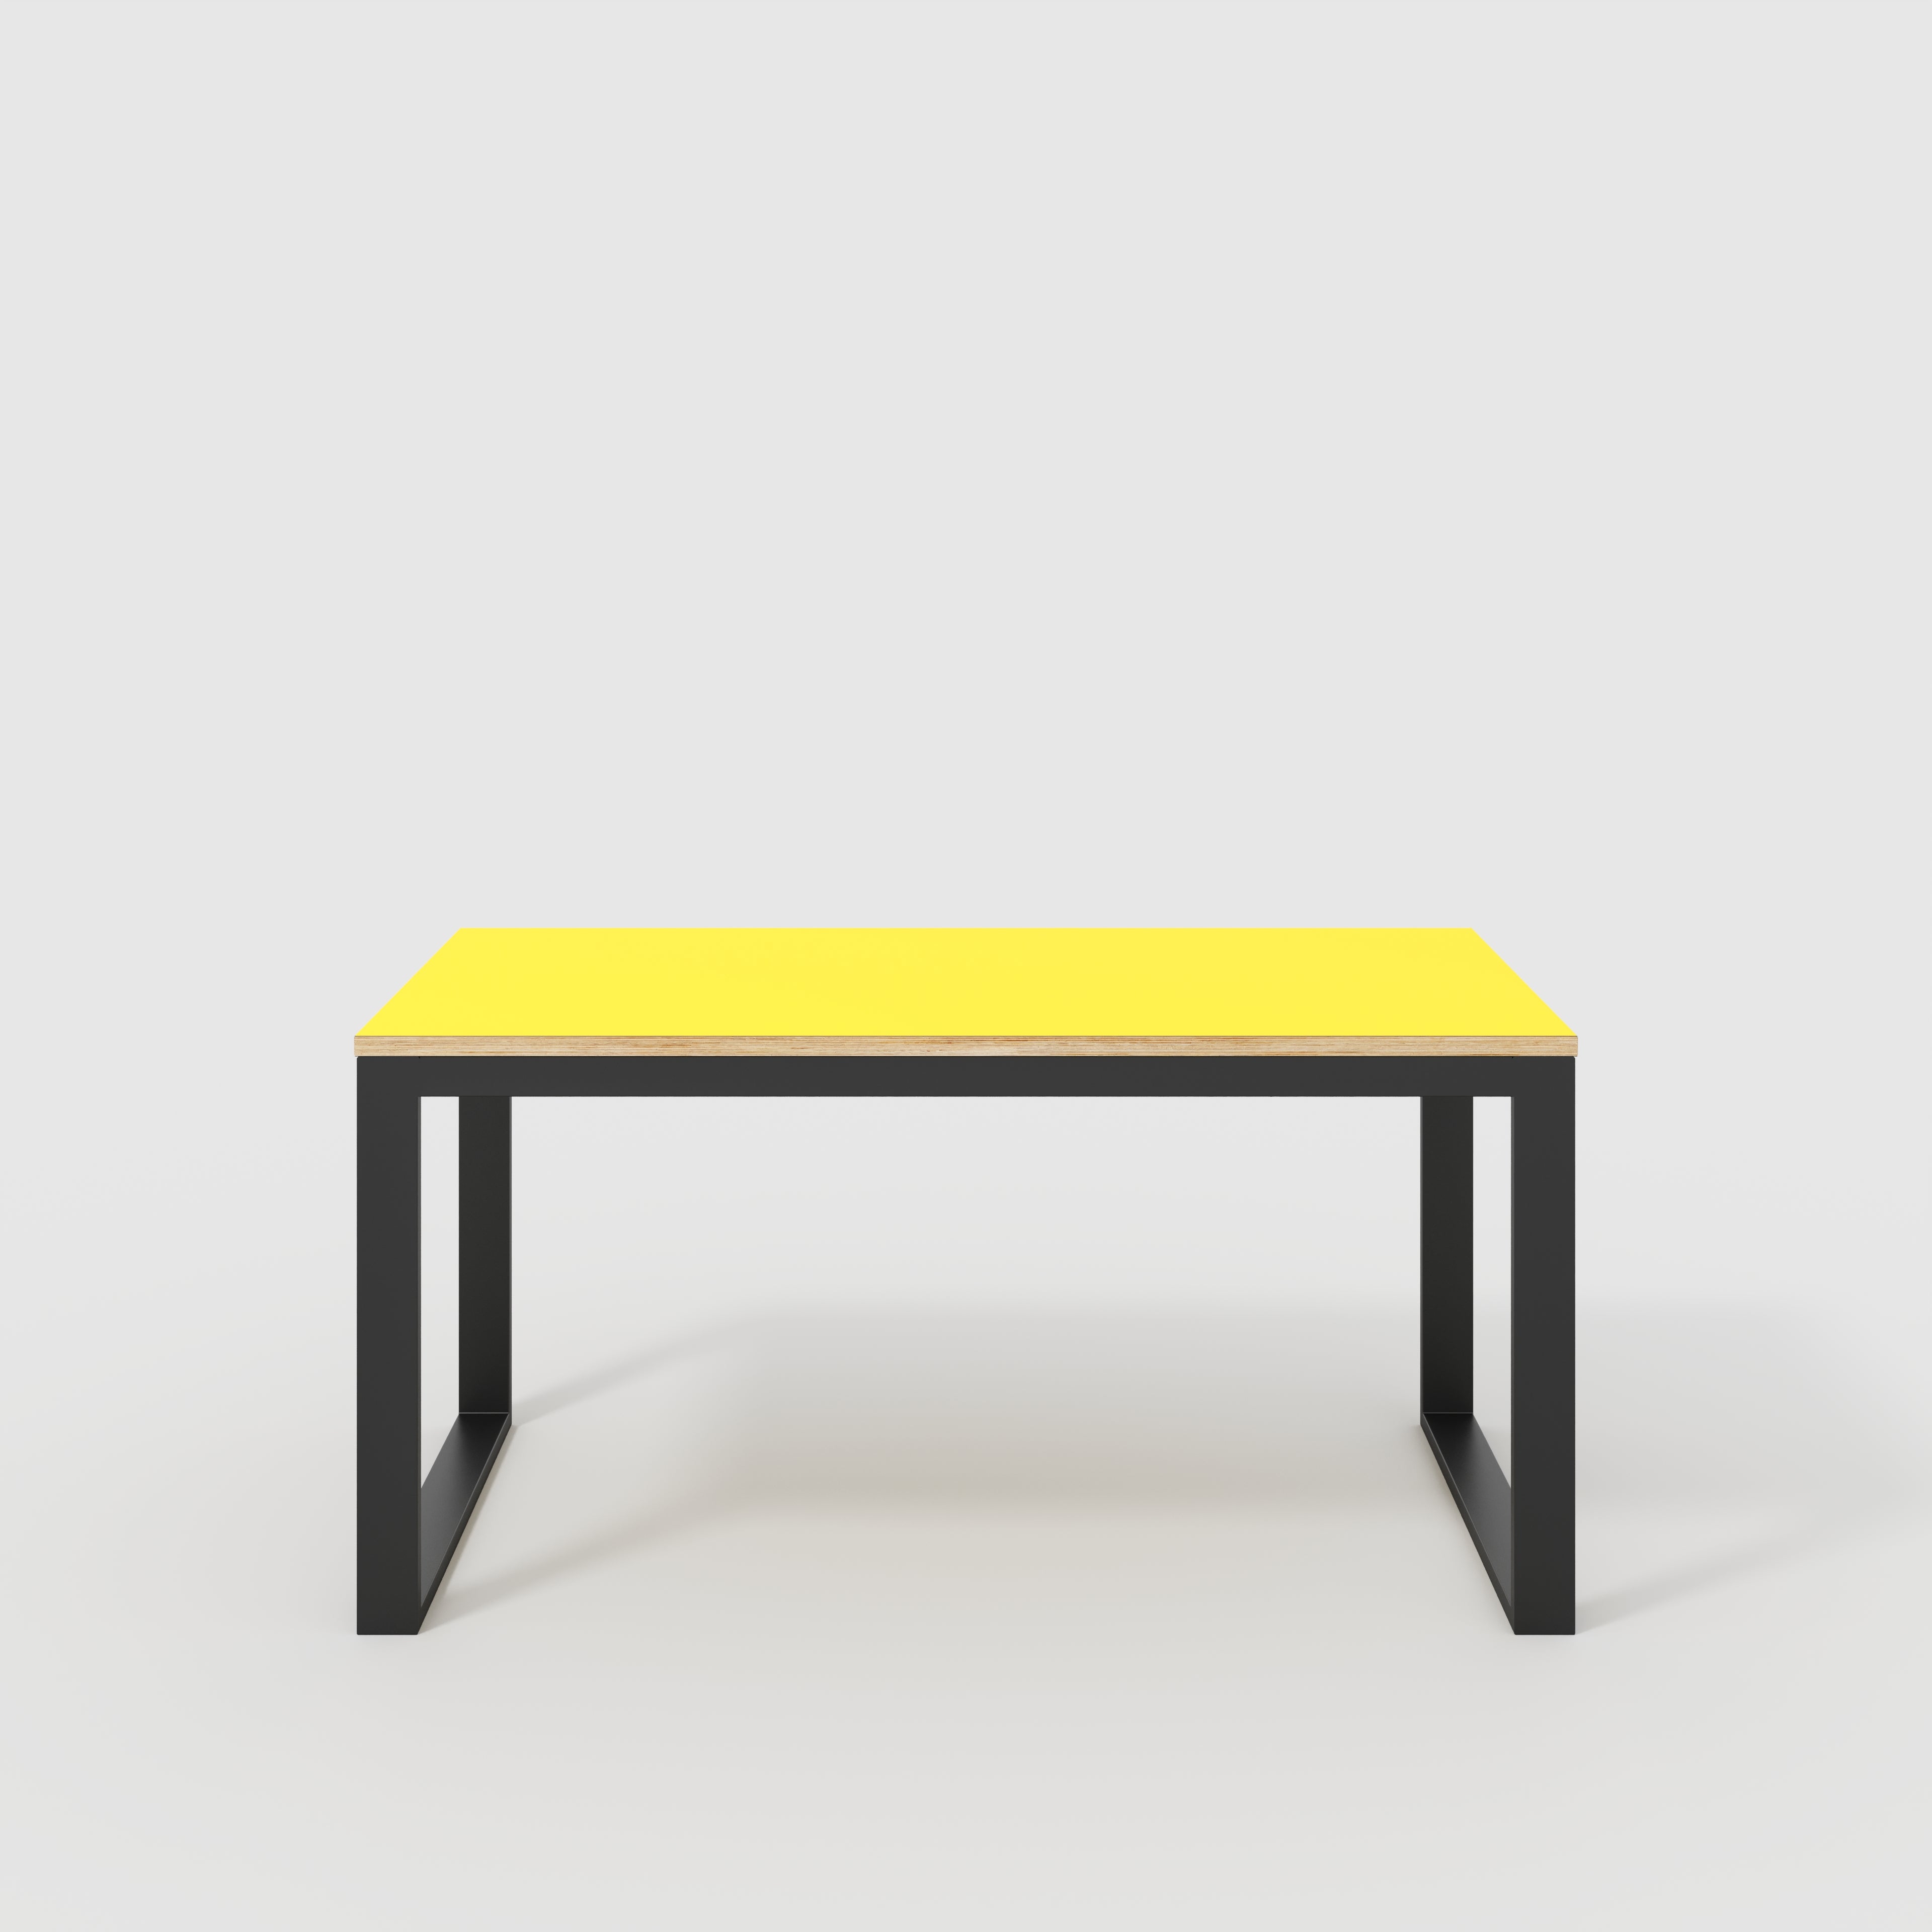 Table with Black Industrial Frame - Formica Chrome Yellow - 1500(w) x 745(d) x 735(h)